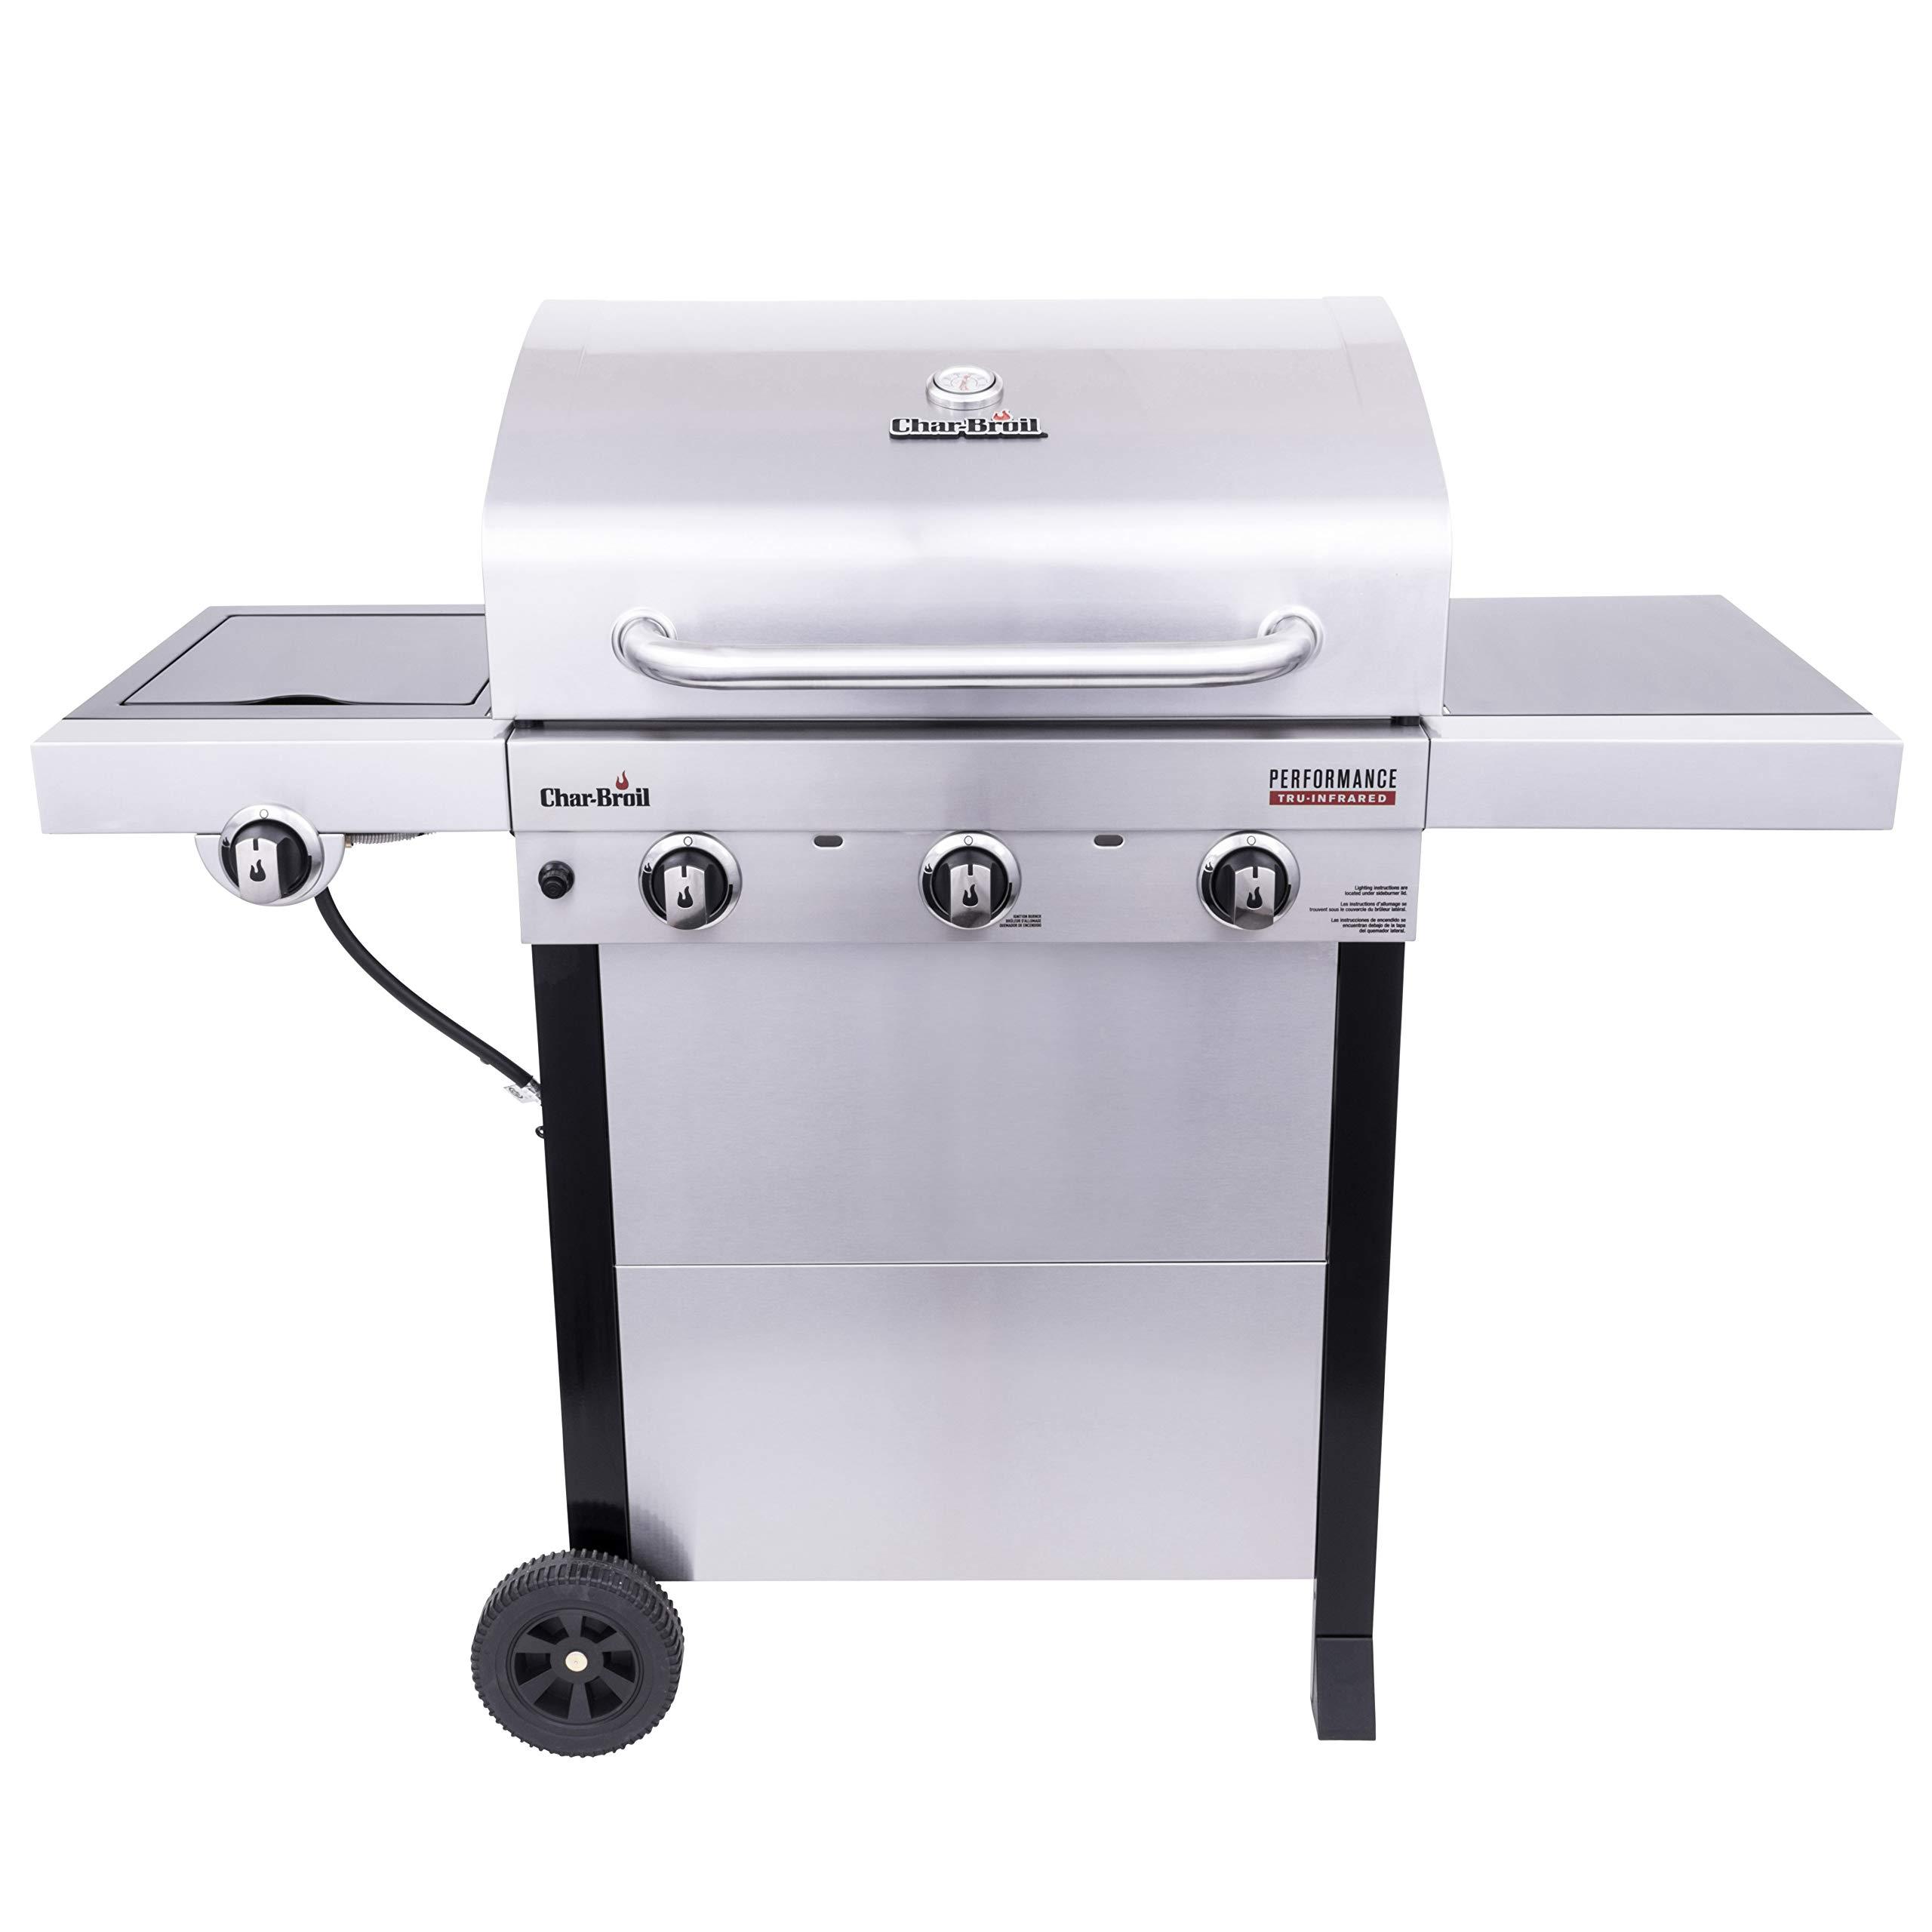 Char-Broil 463370719 Performance TRU-Infrared 3-Burner Cart Style Gas Grill, Stainless Steel - image 1 of 6